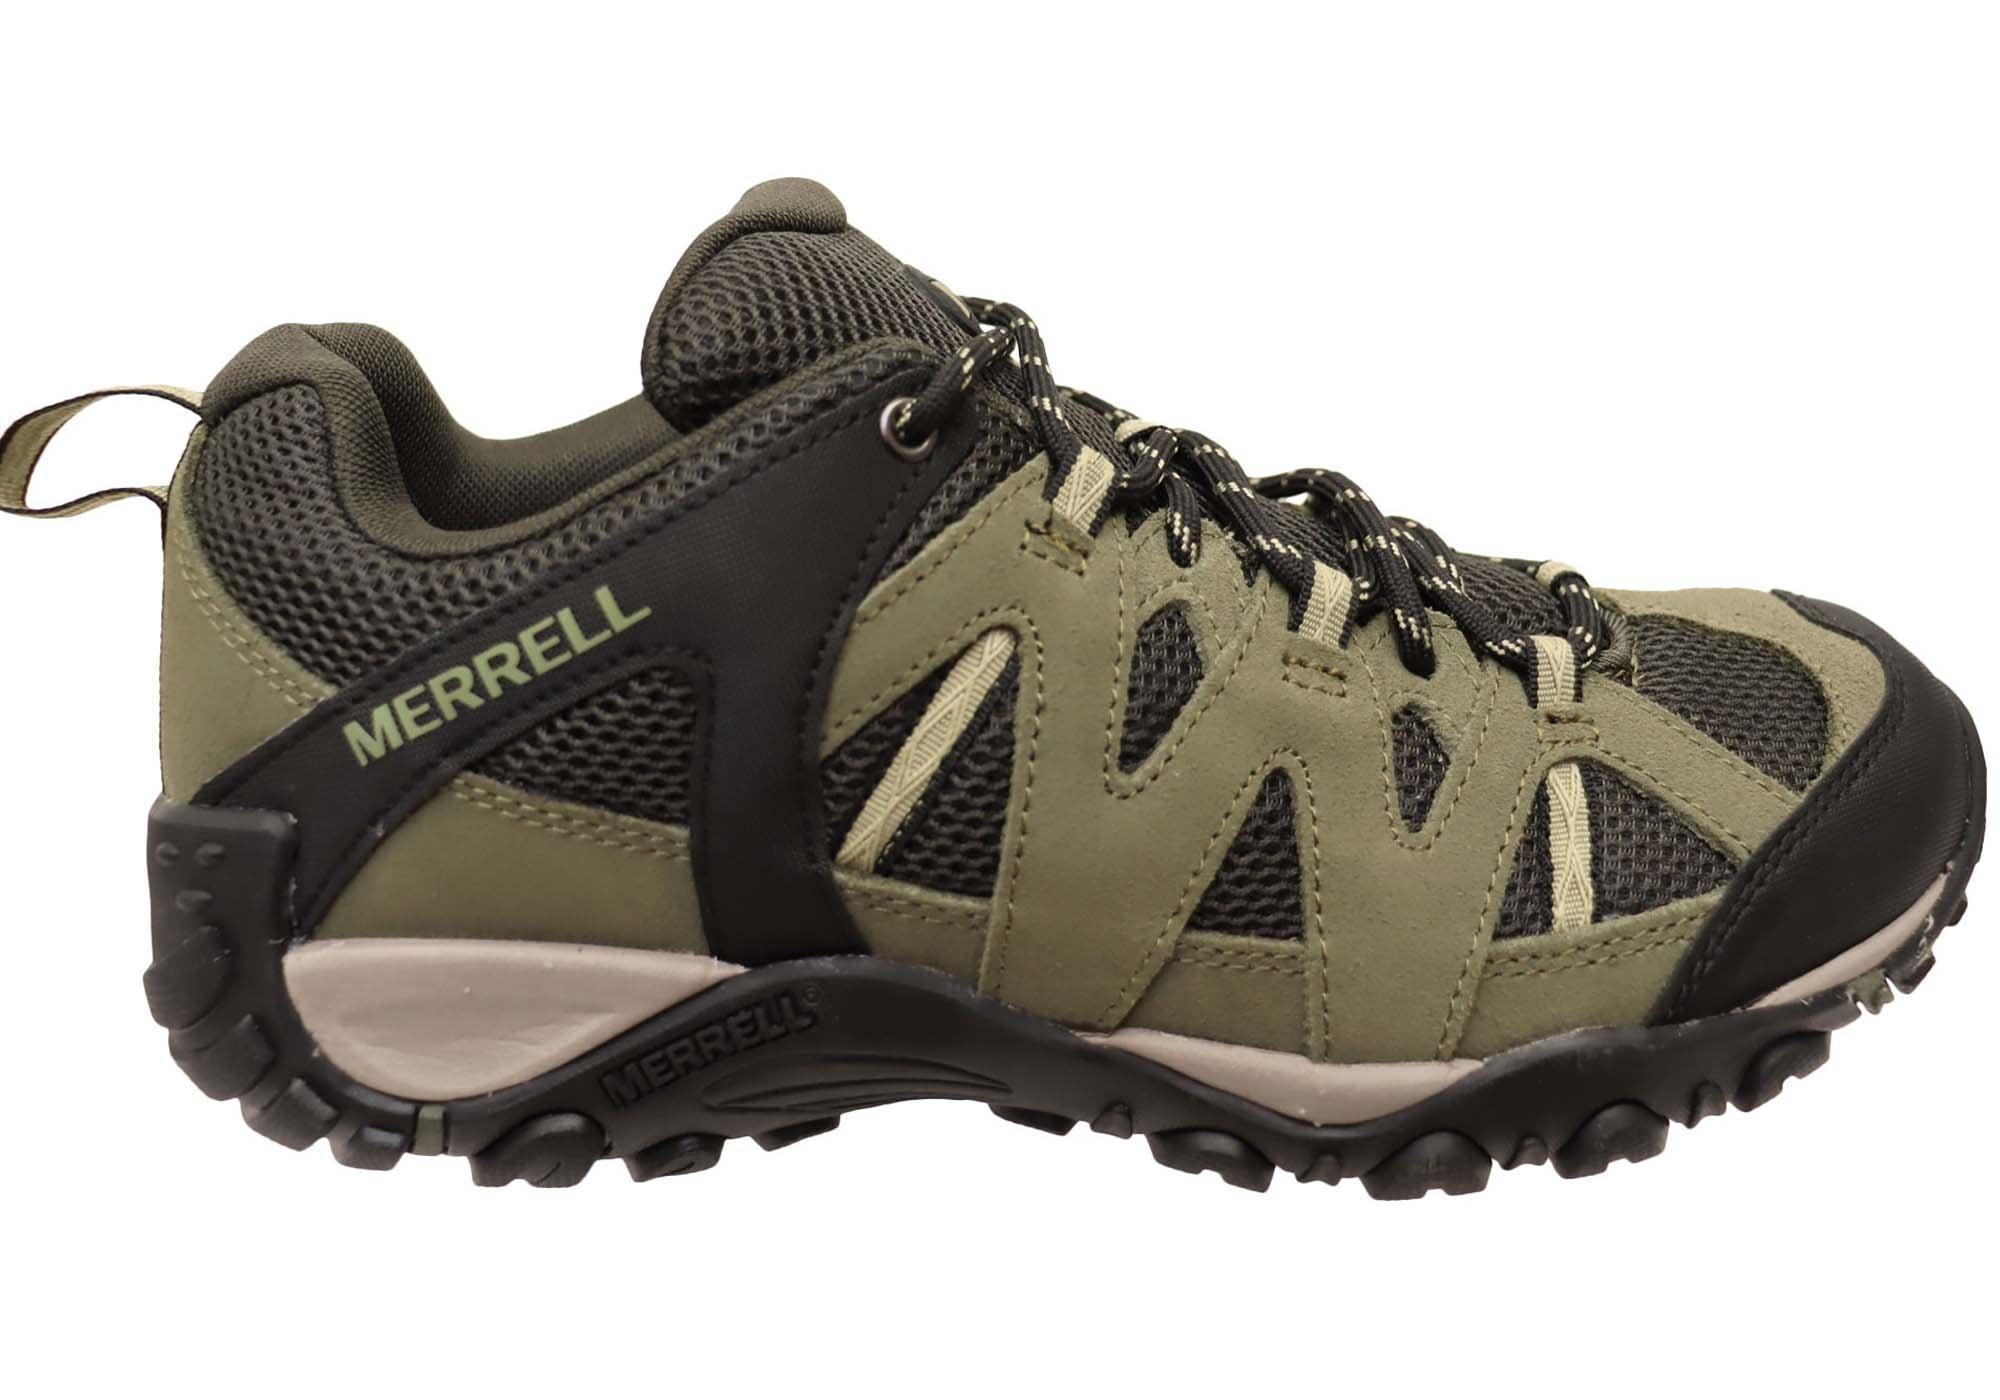 Merrell Mens Deverta 2 Comfortable Leather Hiking Shoes